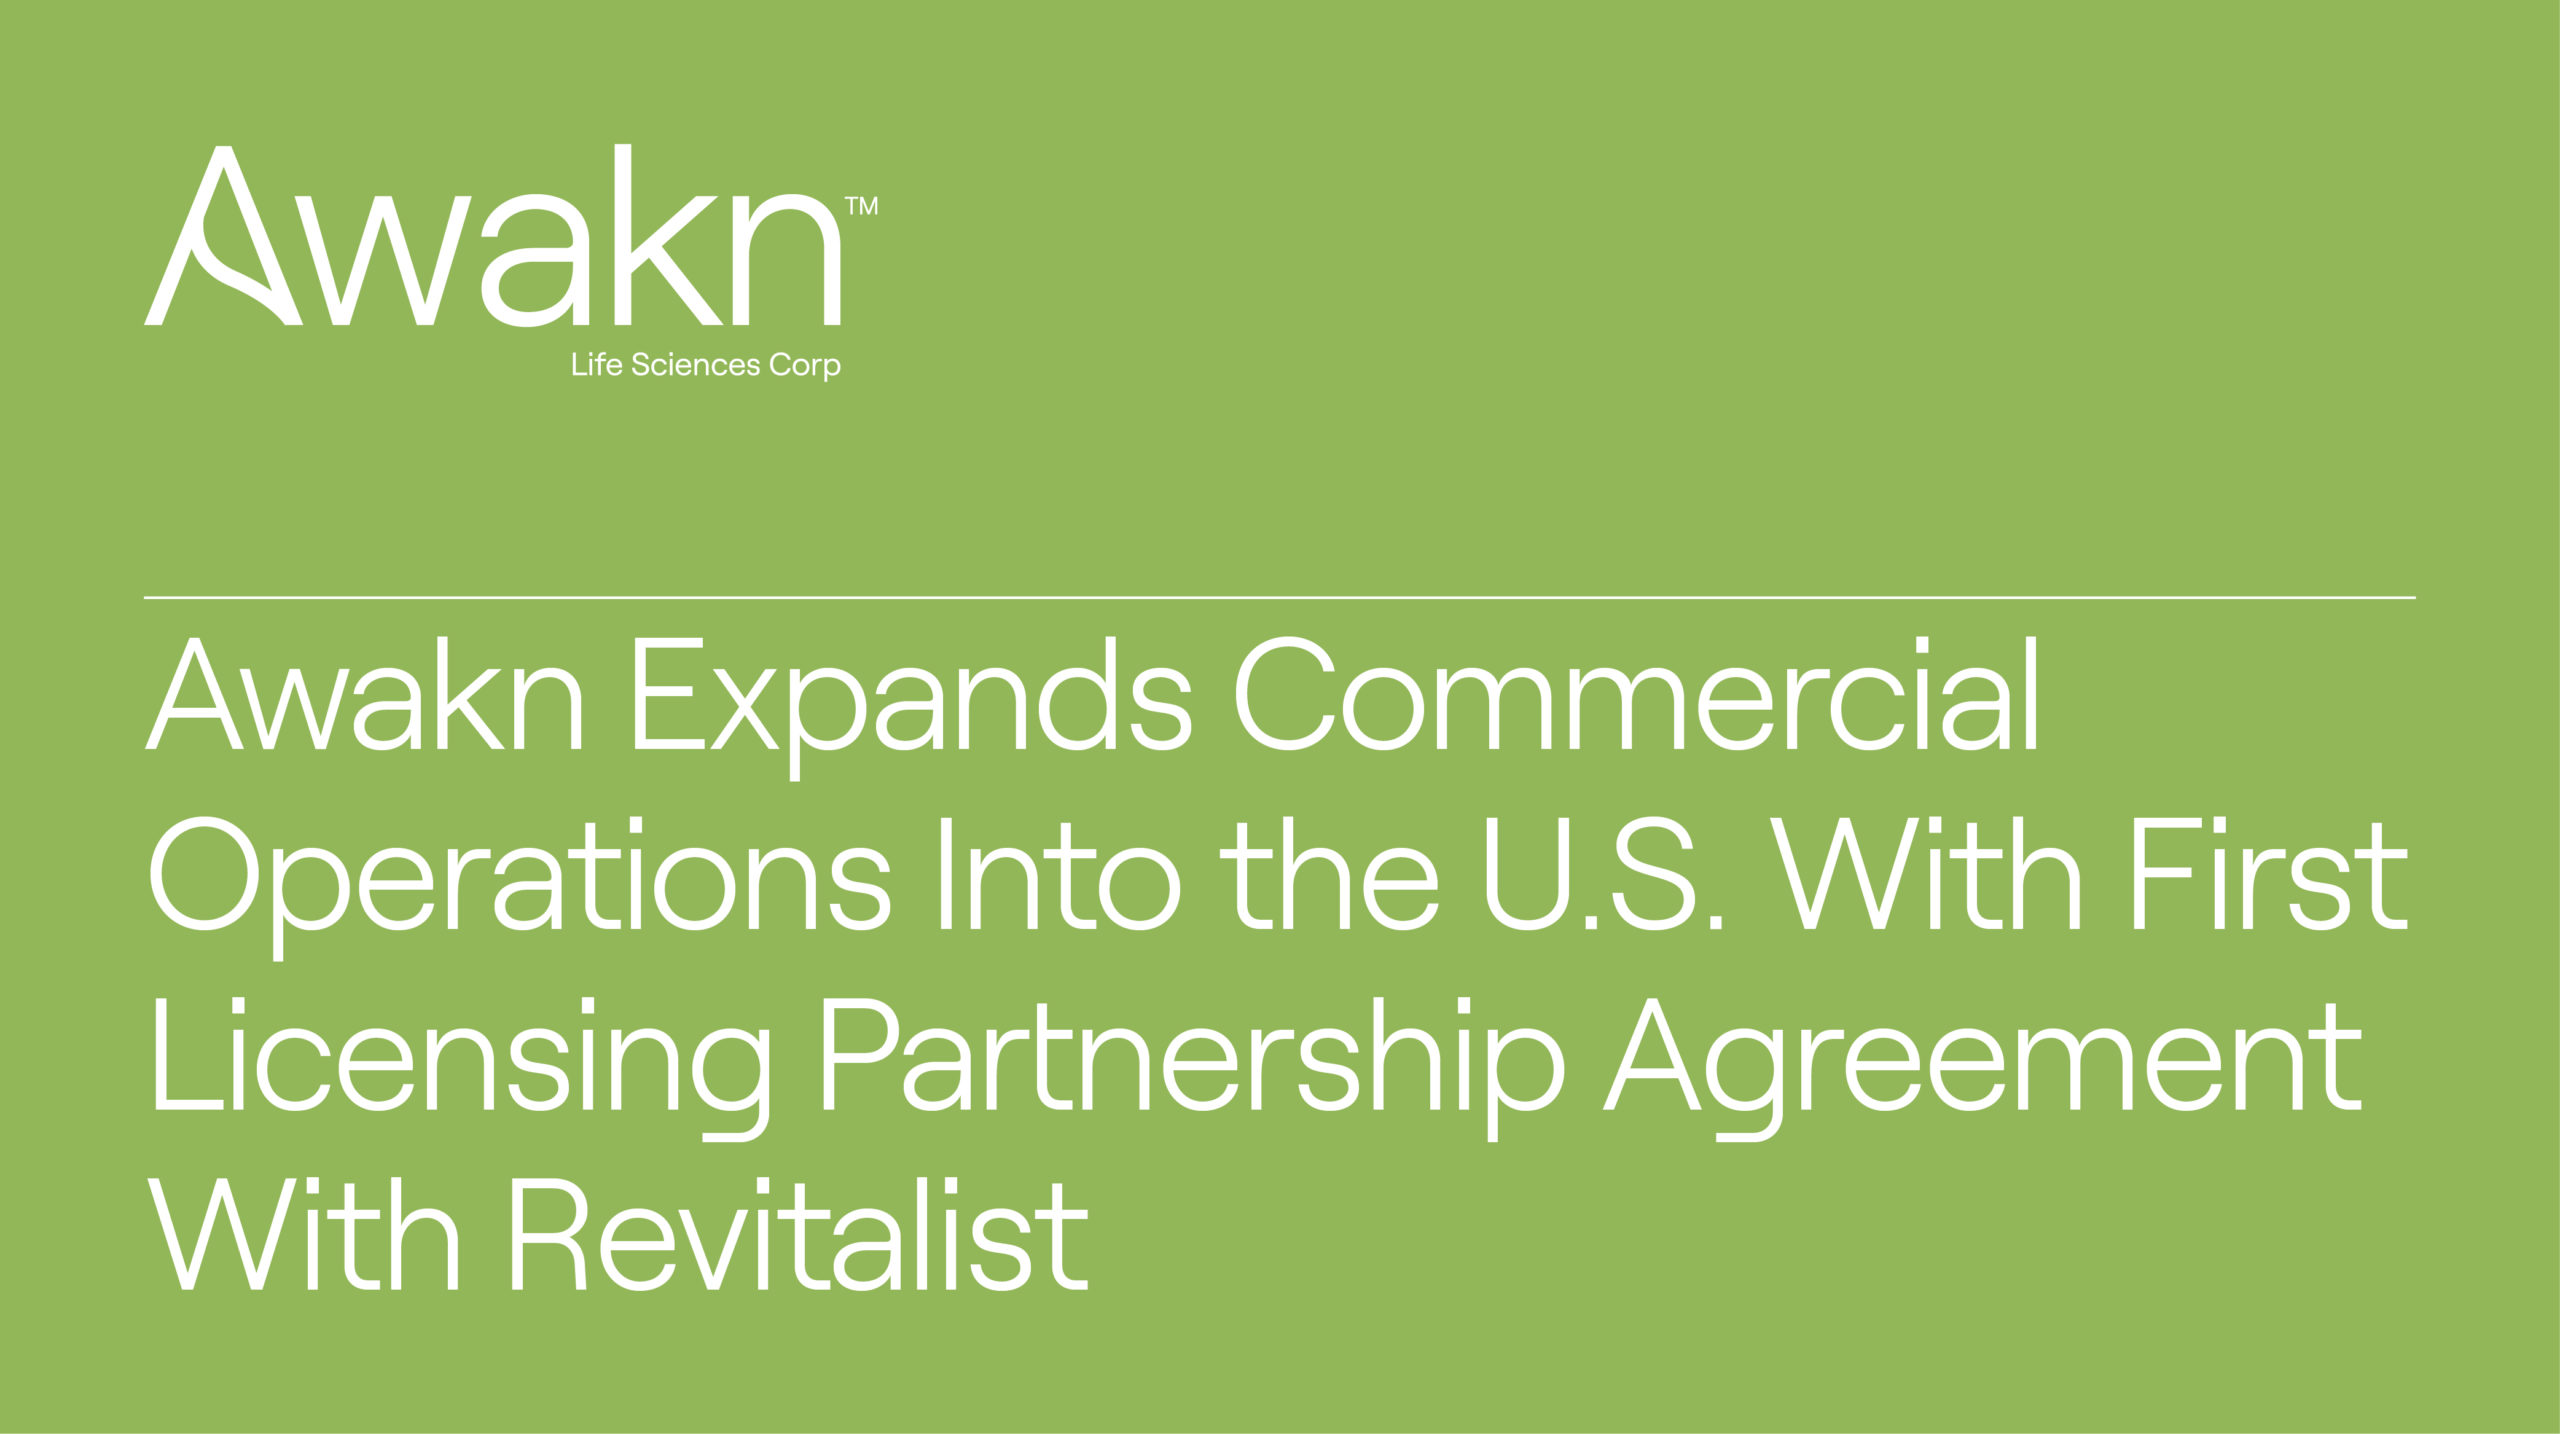 Awakn Life Sciences Expands Commercial Operations Into The U.S. With First Licensing Partnership Agreement With Revitalist